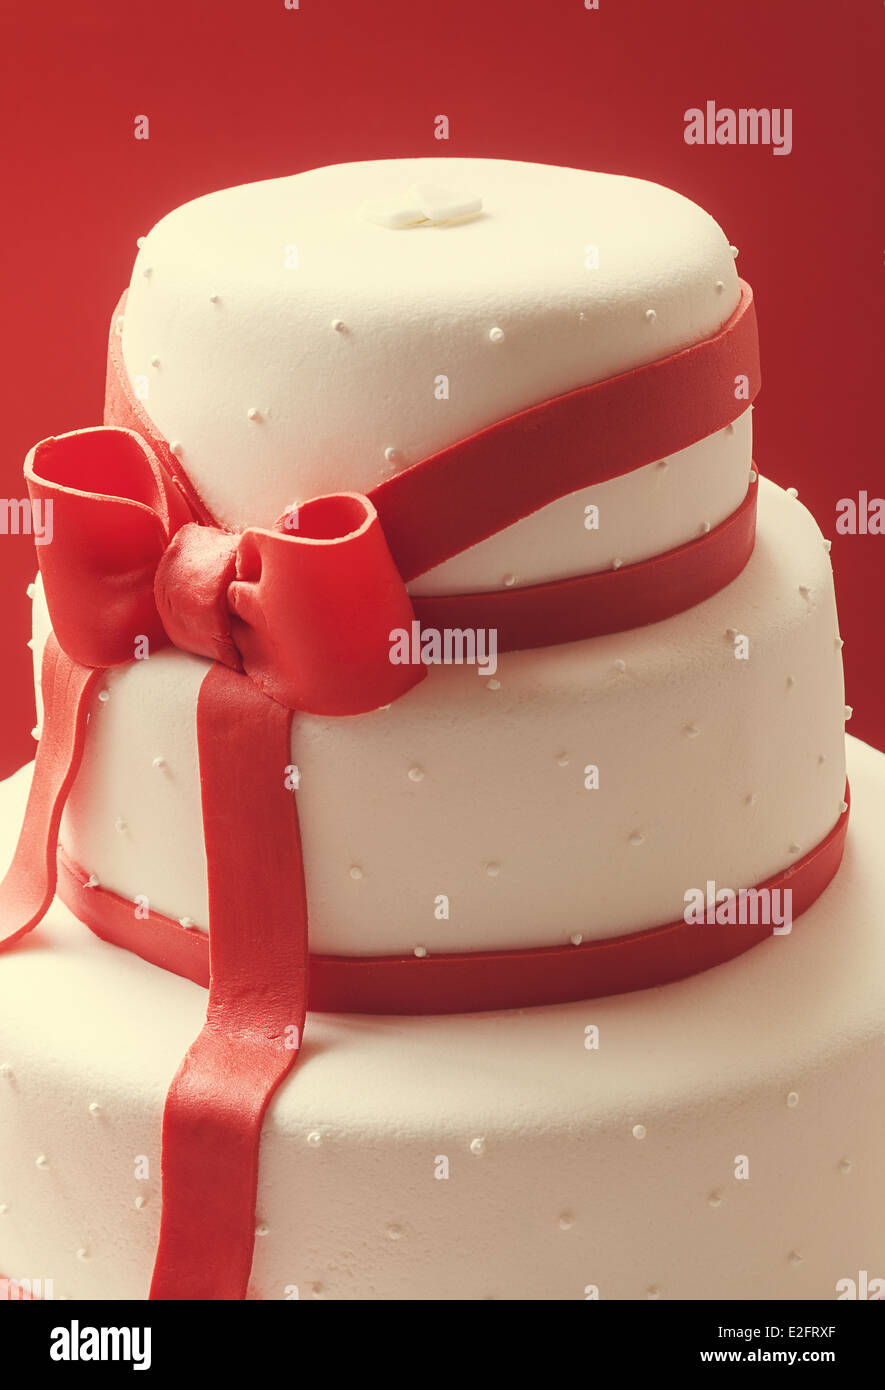 Details of wedding cake, decorated with red sugar ribbons. Stock Photo